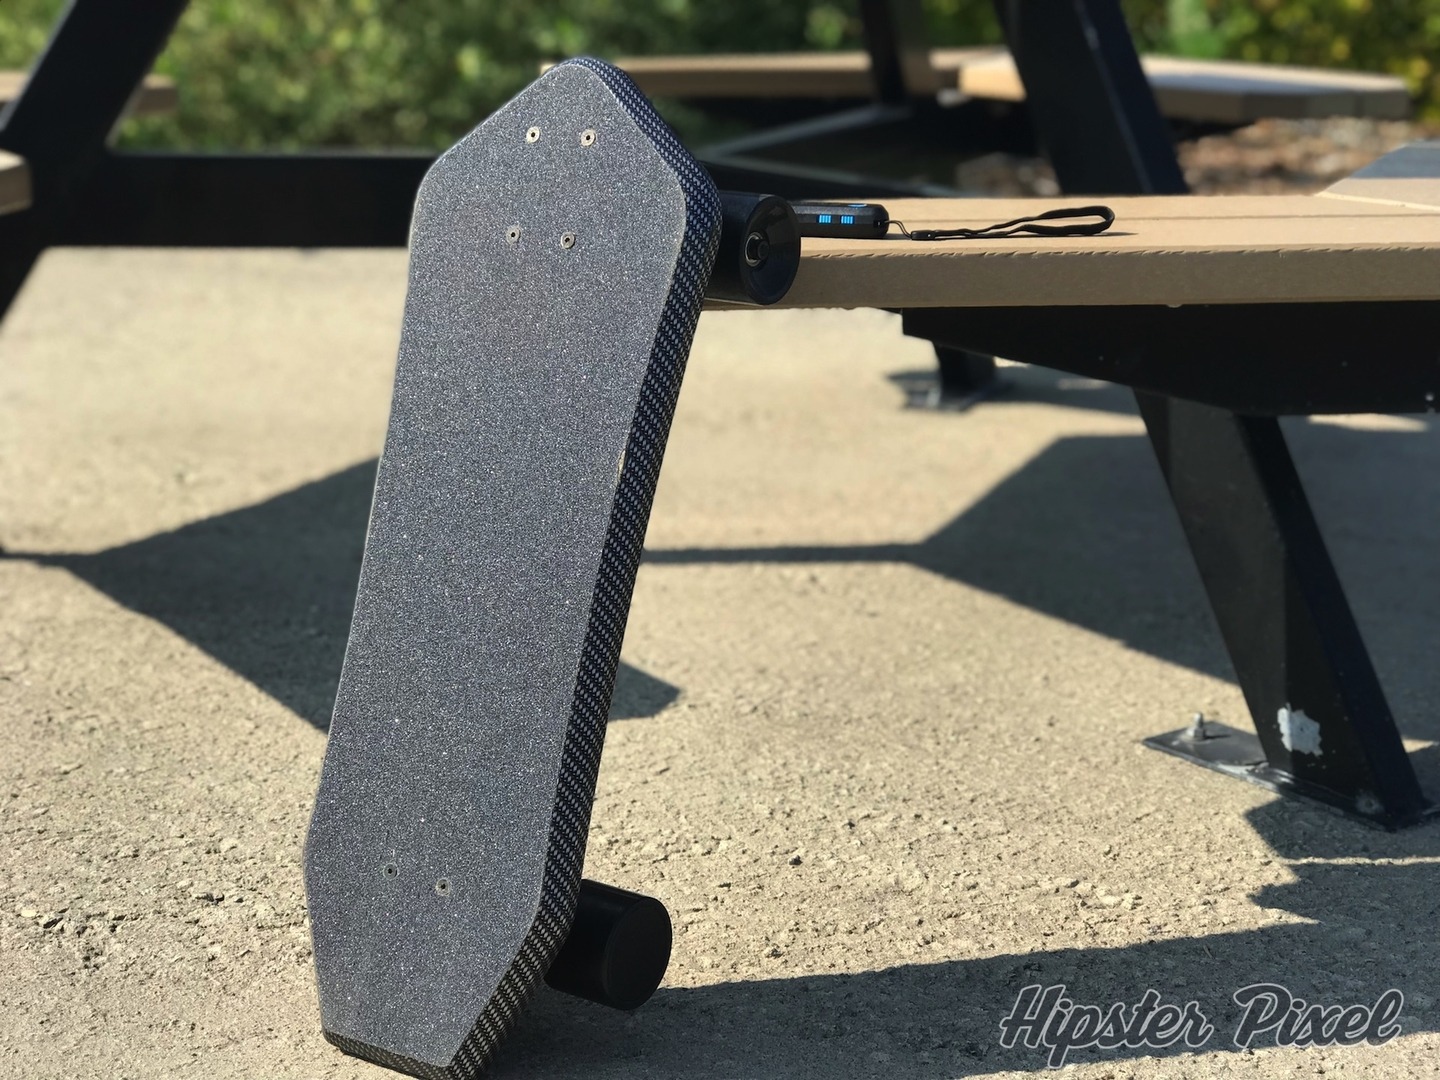 Winboard GT-M8 2.0, an Electric Penny Board [Review]